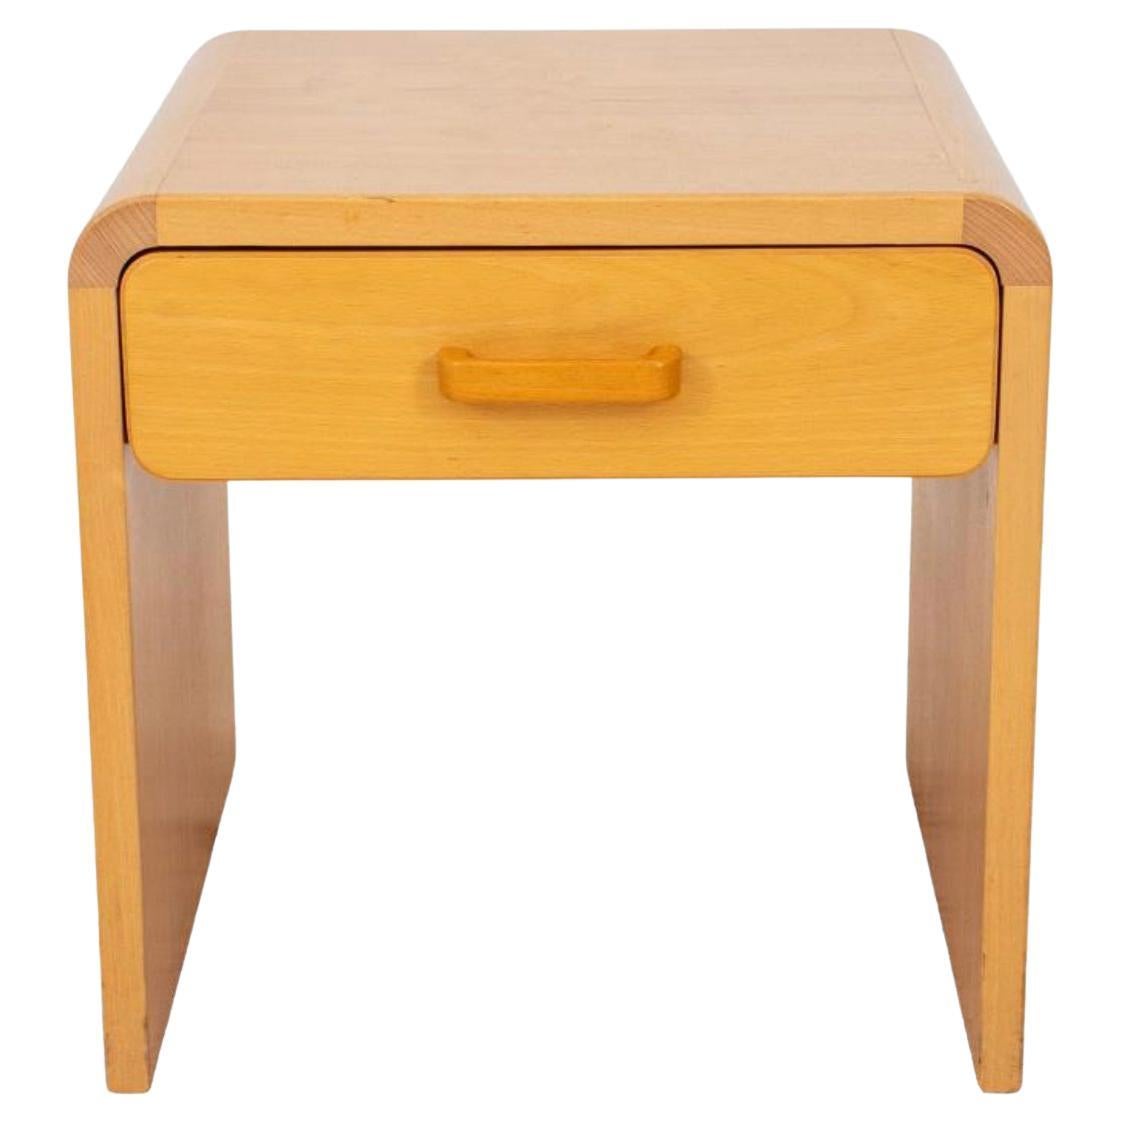 Midcentury Danish Modern maple blonde bedside table nightstand with one drawer. By Jens Ole Christensen for GETAMA. 

Only (1) Nightstand available.

Measures: 17.5